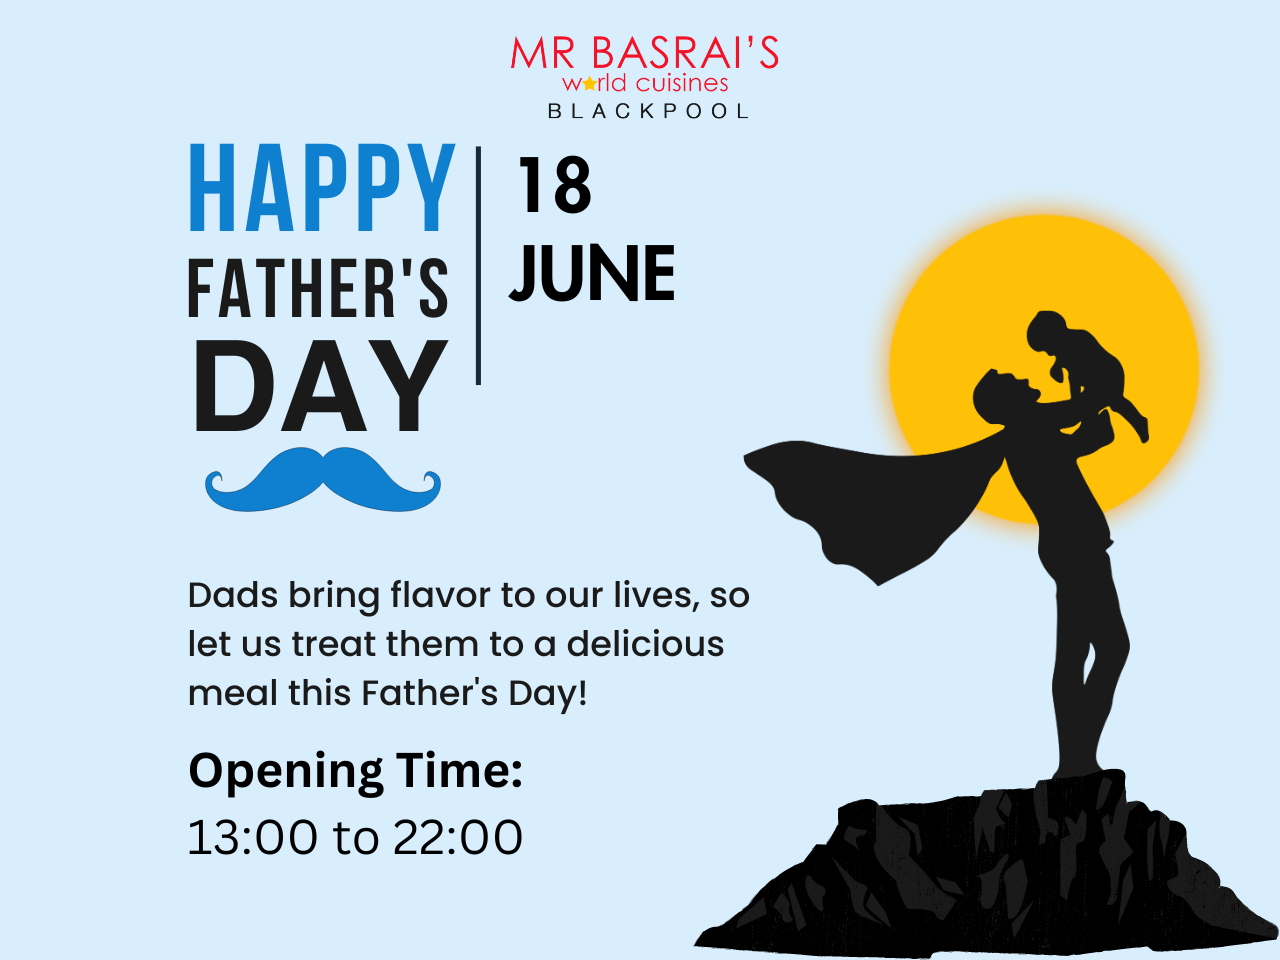 Dads deserve a special treat on their day. Bring Dad to Mr Basrai and make memories over a delightful meal.